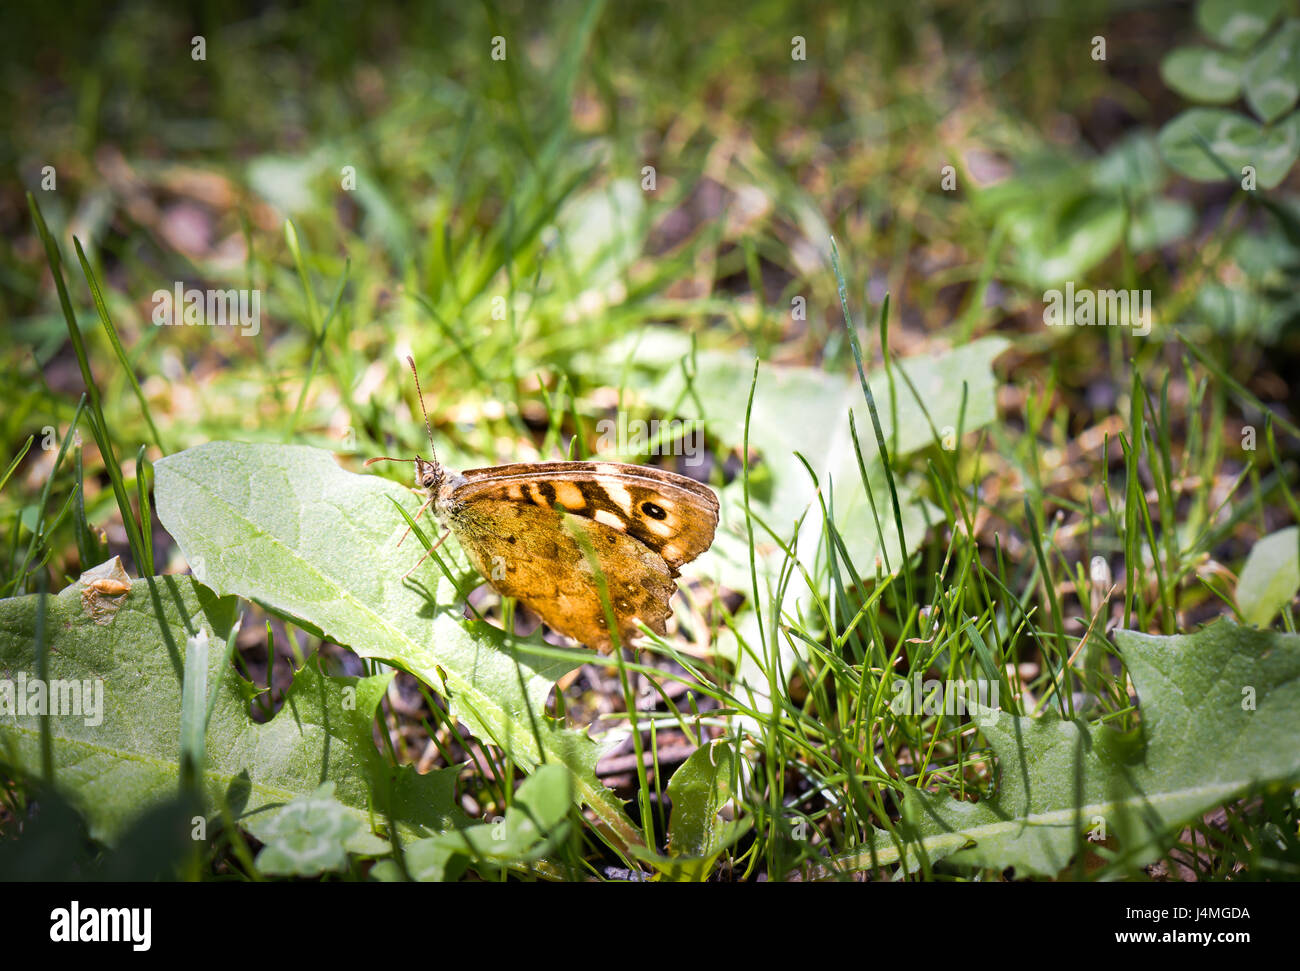 A nice butterfly resting on a leaf Stock Photo